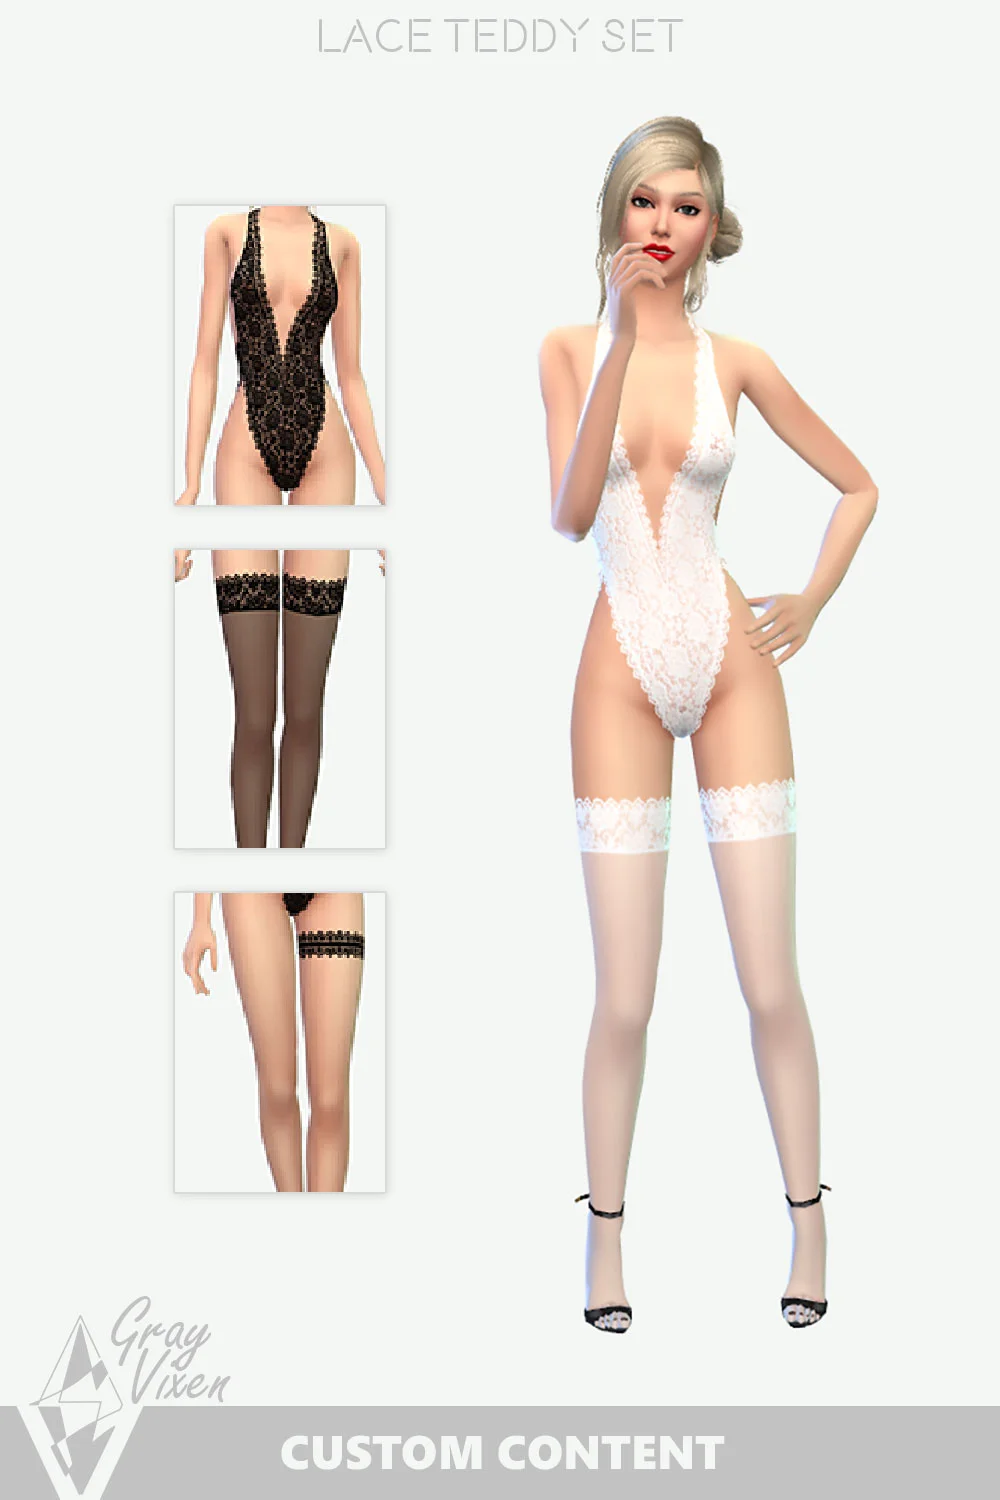 The sims 4 sexy lace teddy cc